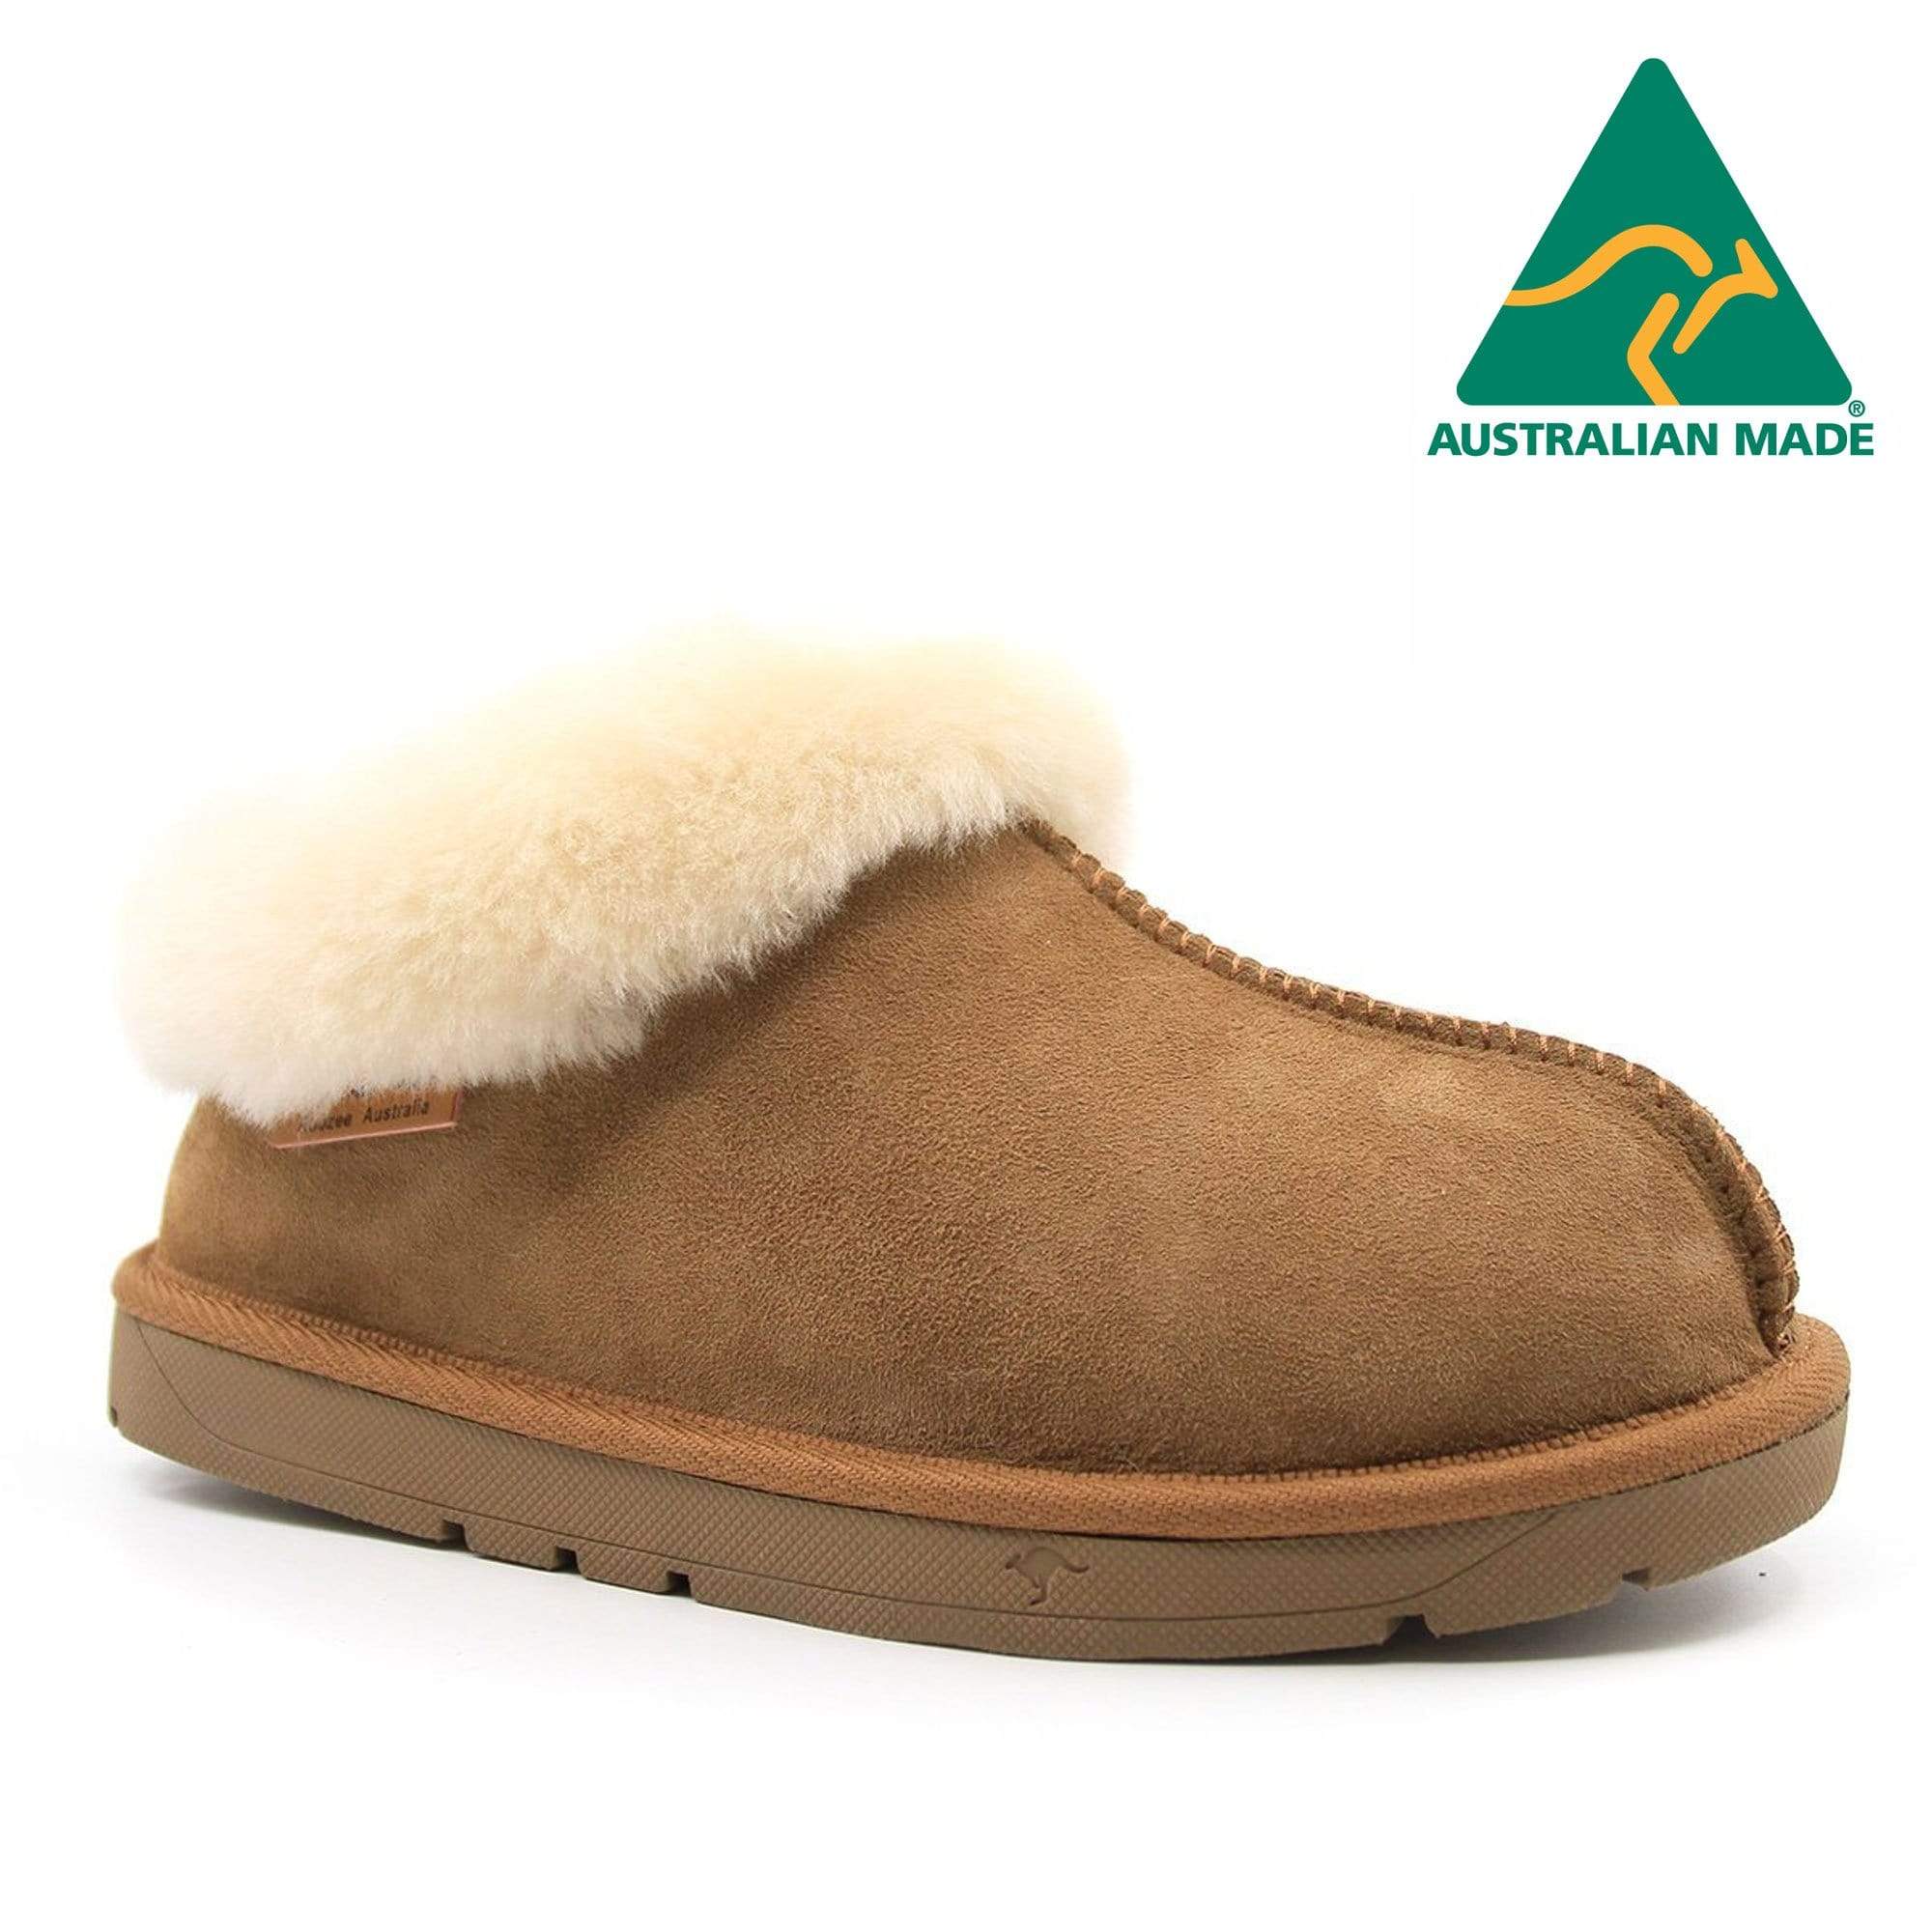 Roozee UGG Homey Ankle Slipper - Made in Australia